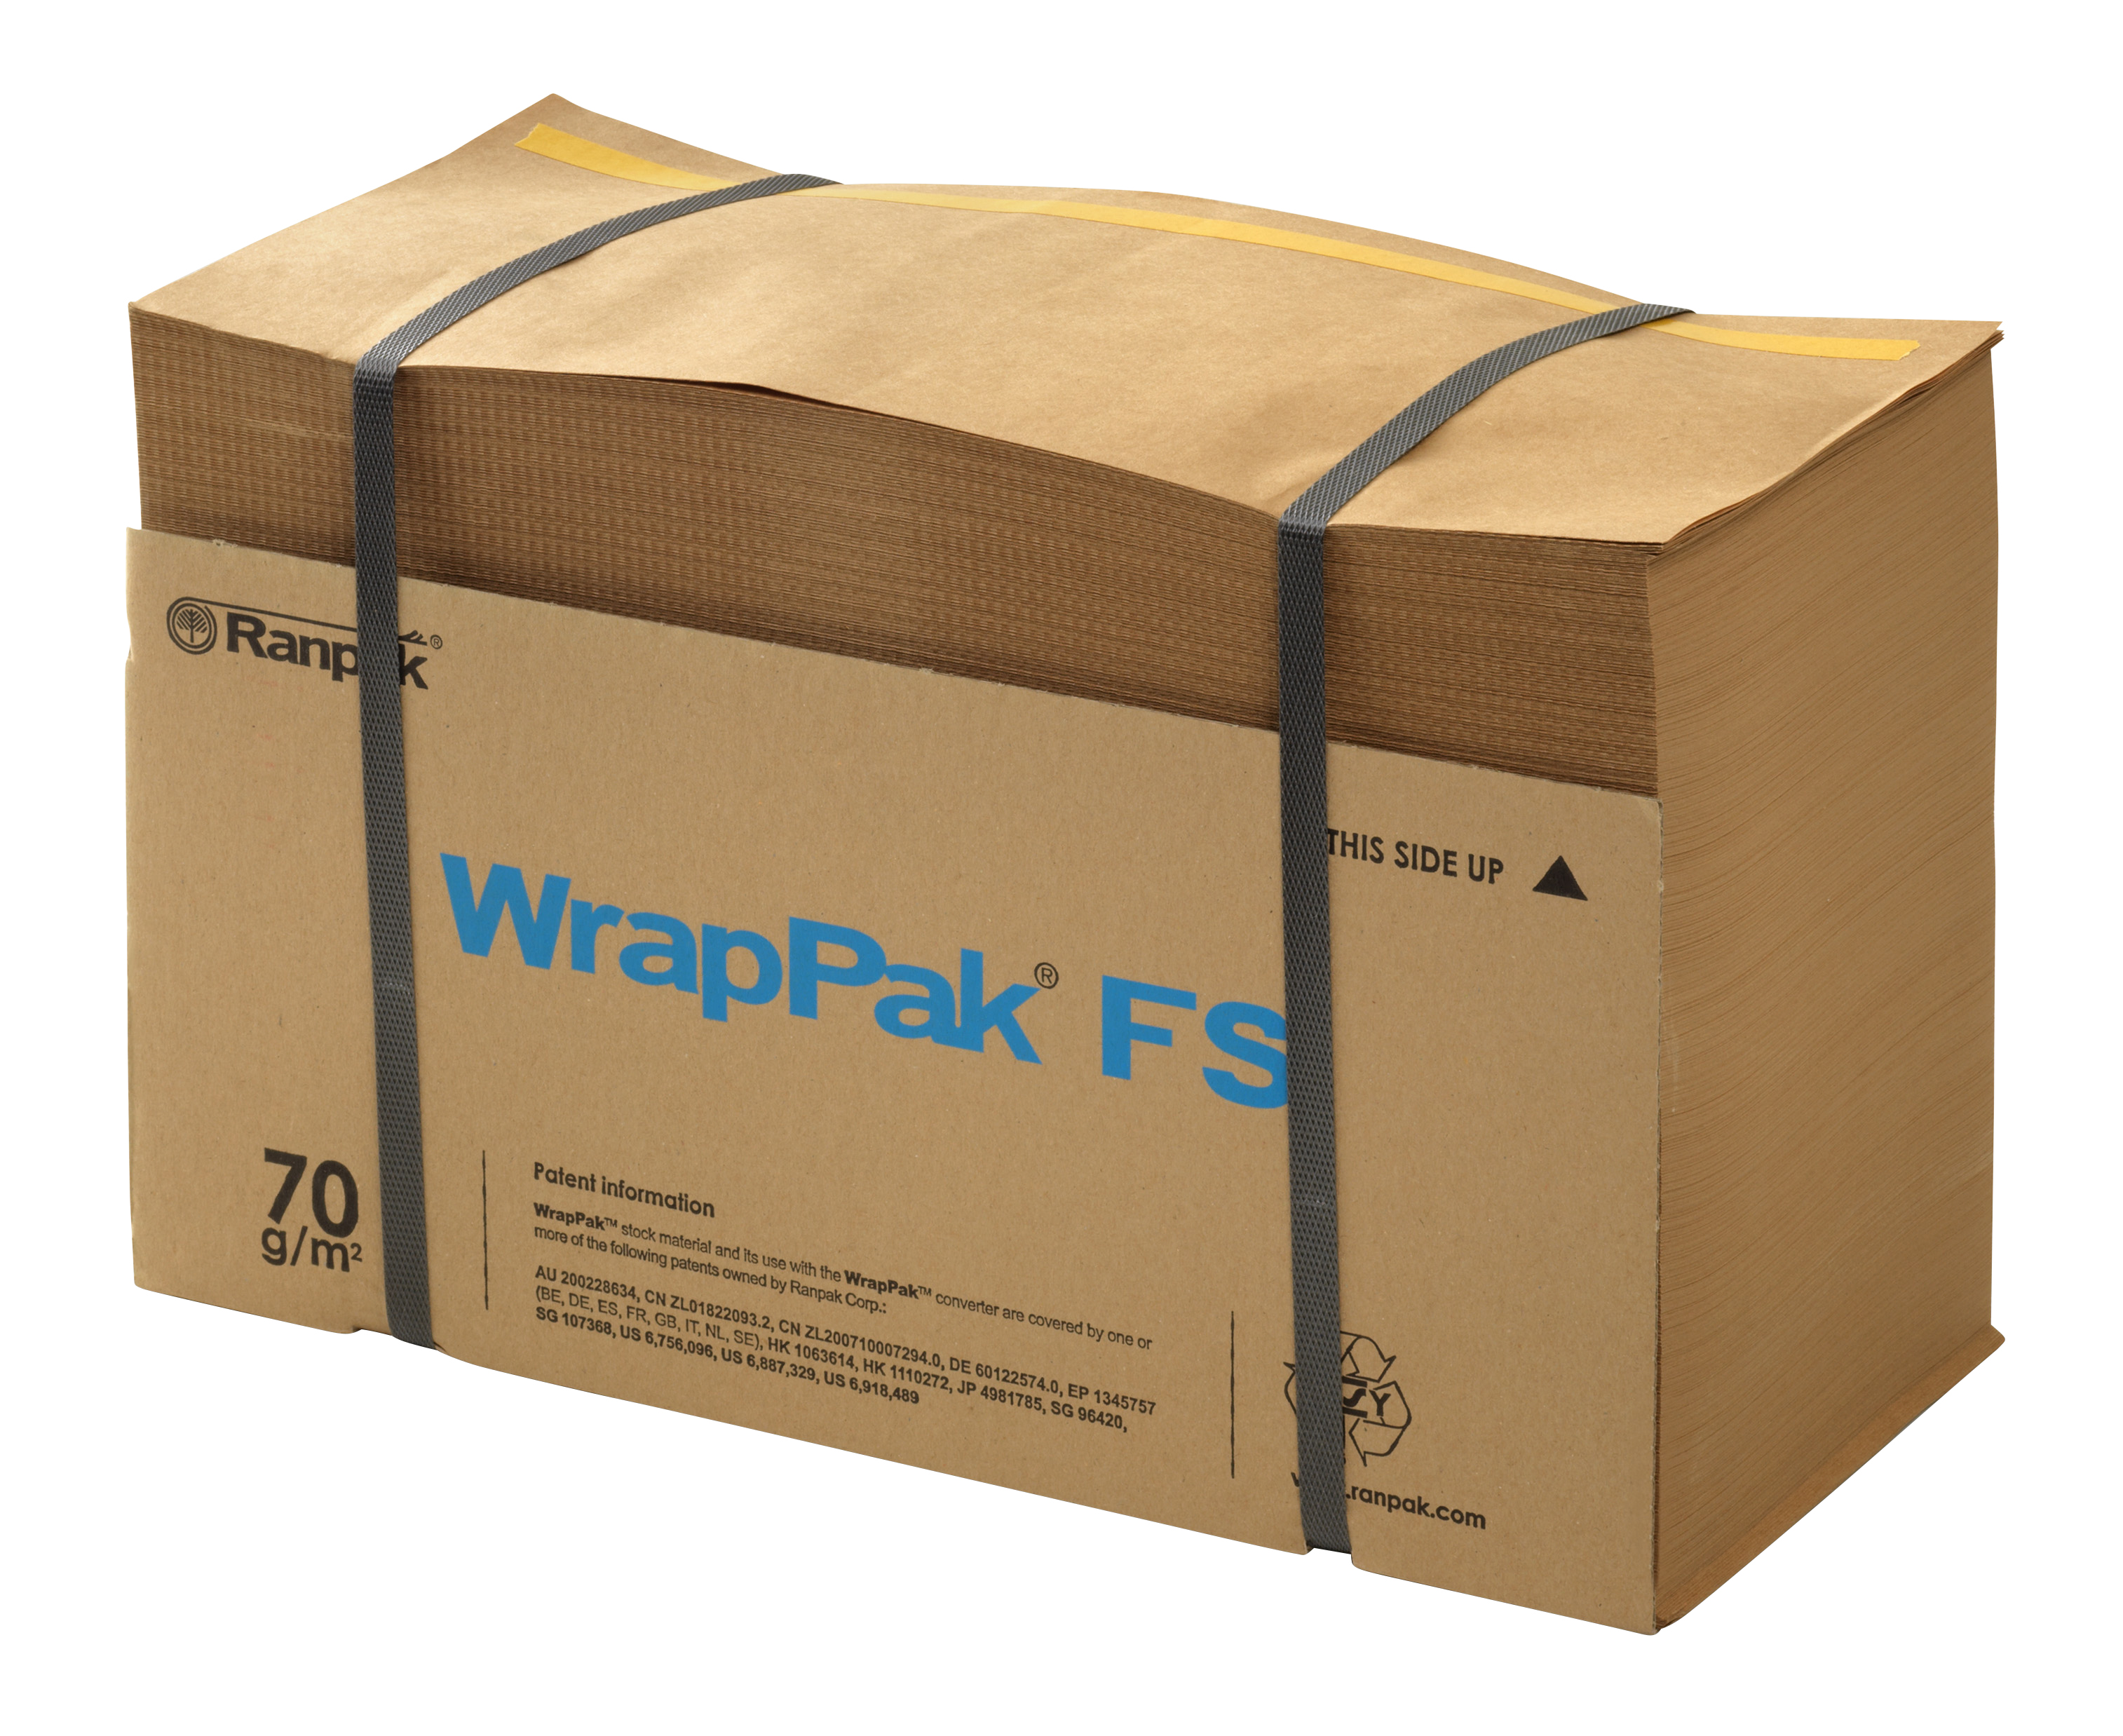 WrapPak WrapPak Cold Chain Protector remplissage et calage detail 4